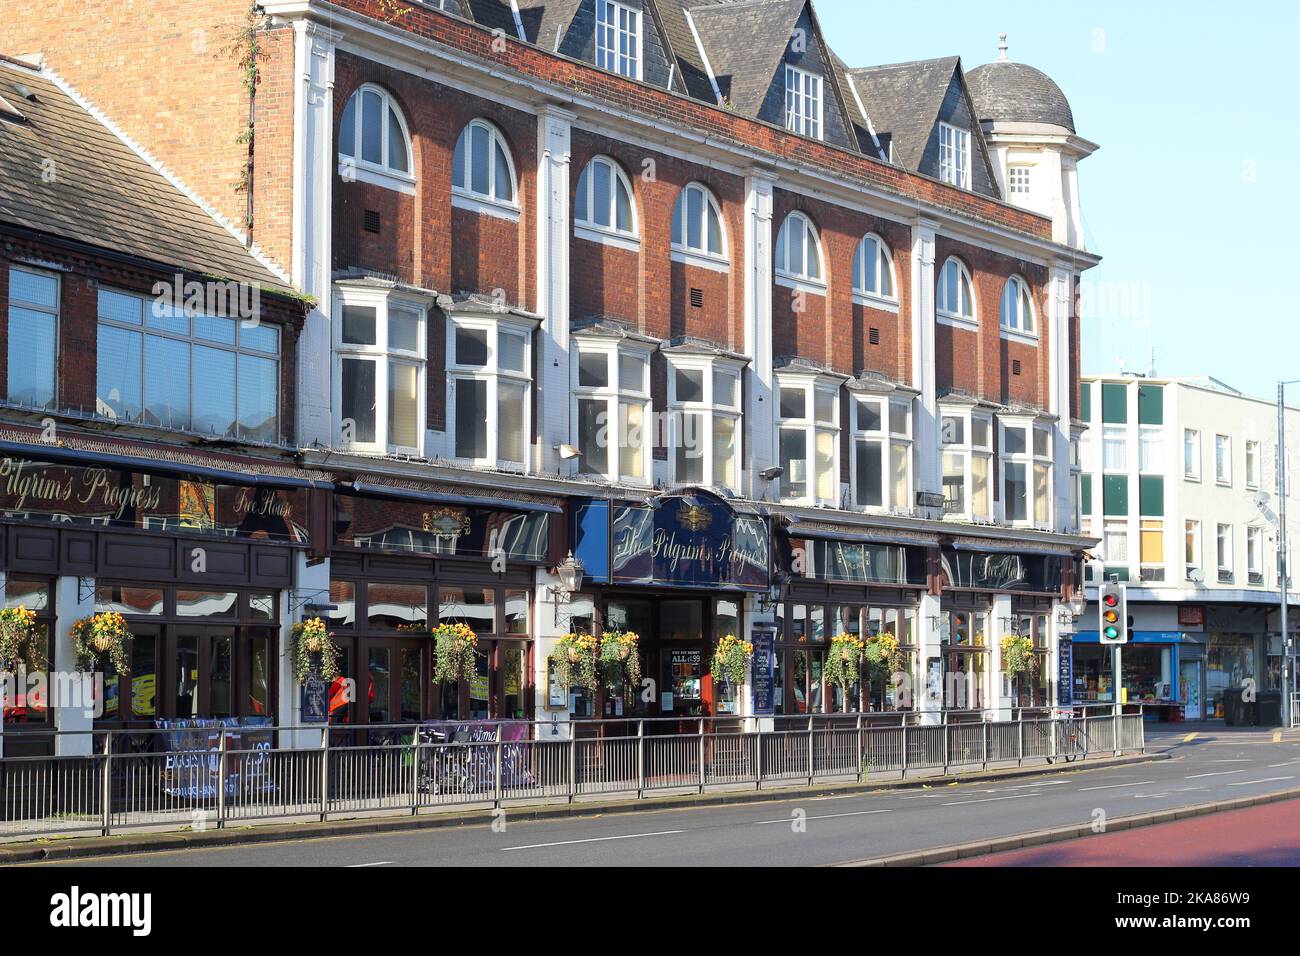 Pilgrims public house, Bedford, United Kingdom. A Wetherspoons public house in the centre or Bedford. Stock Photo